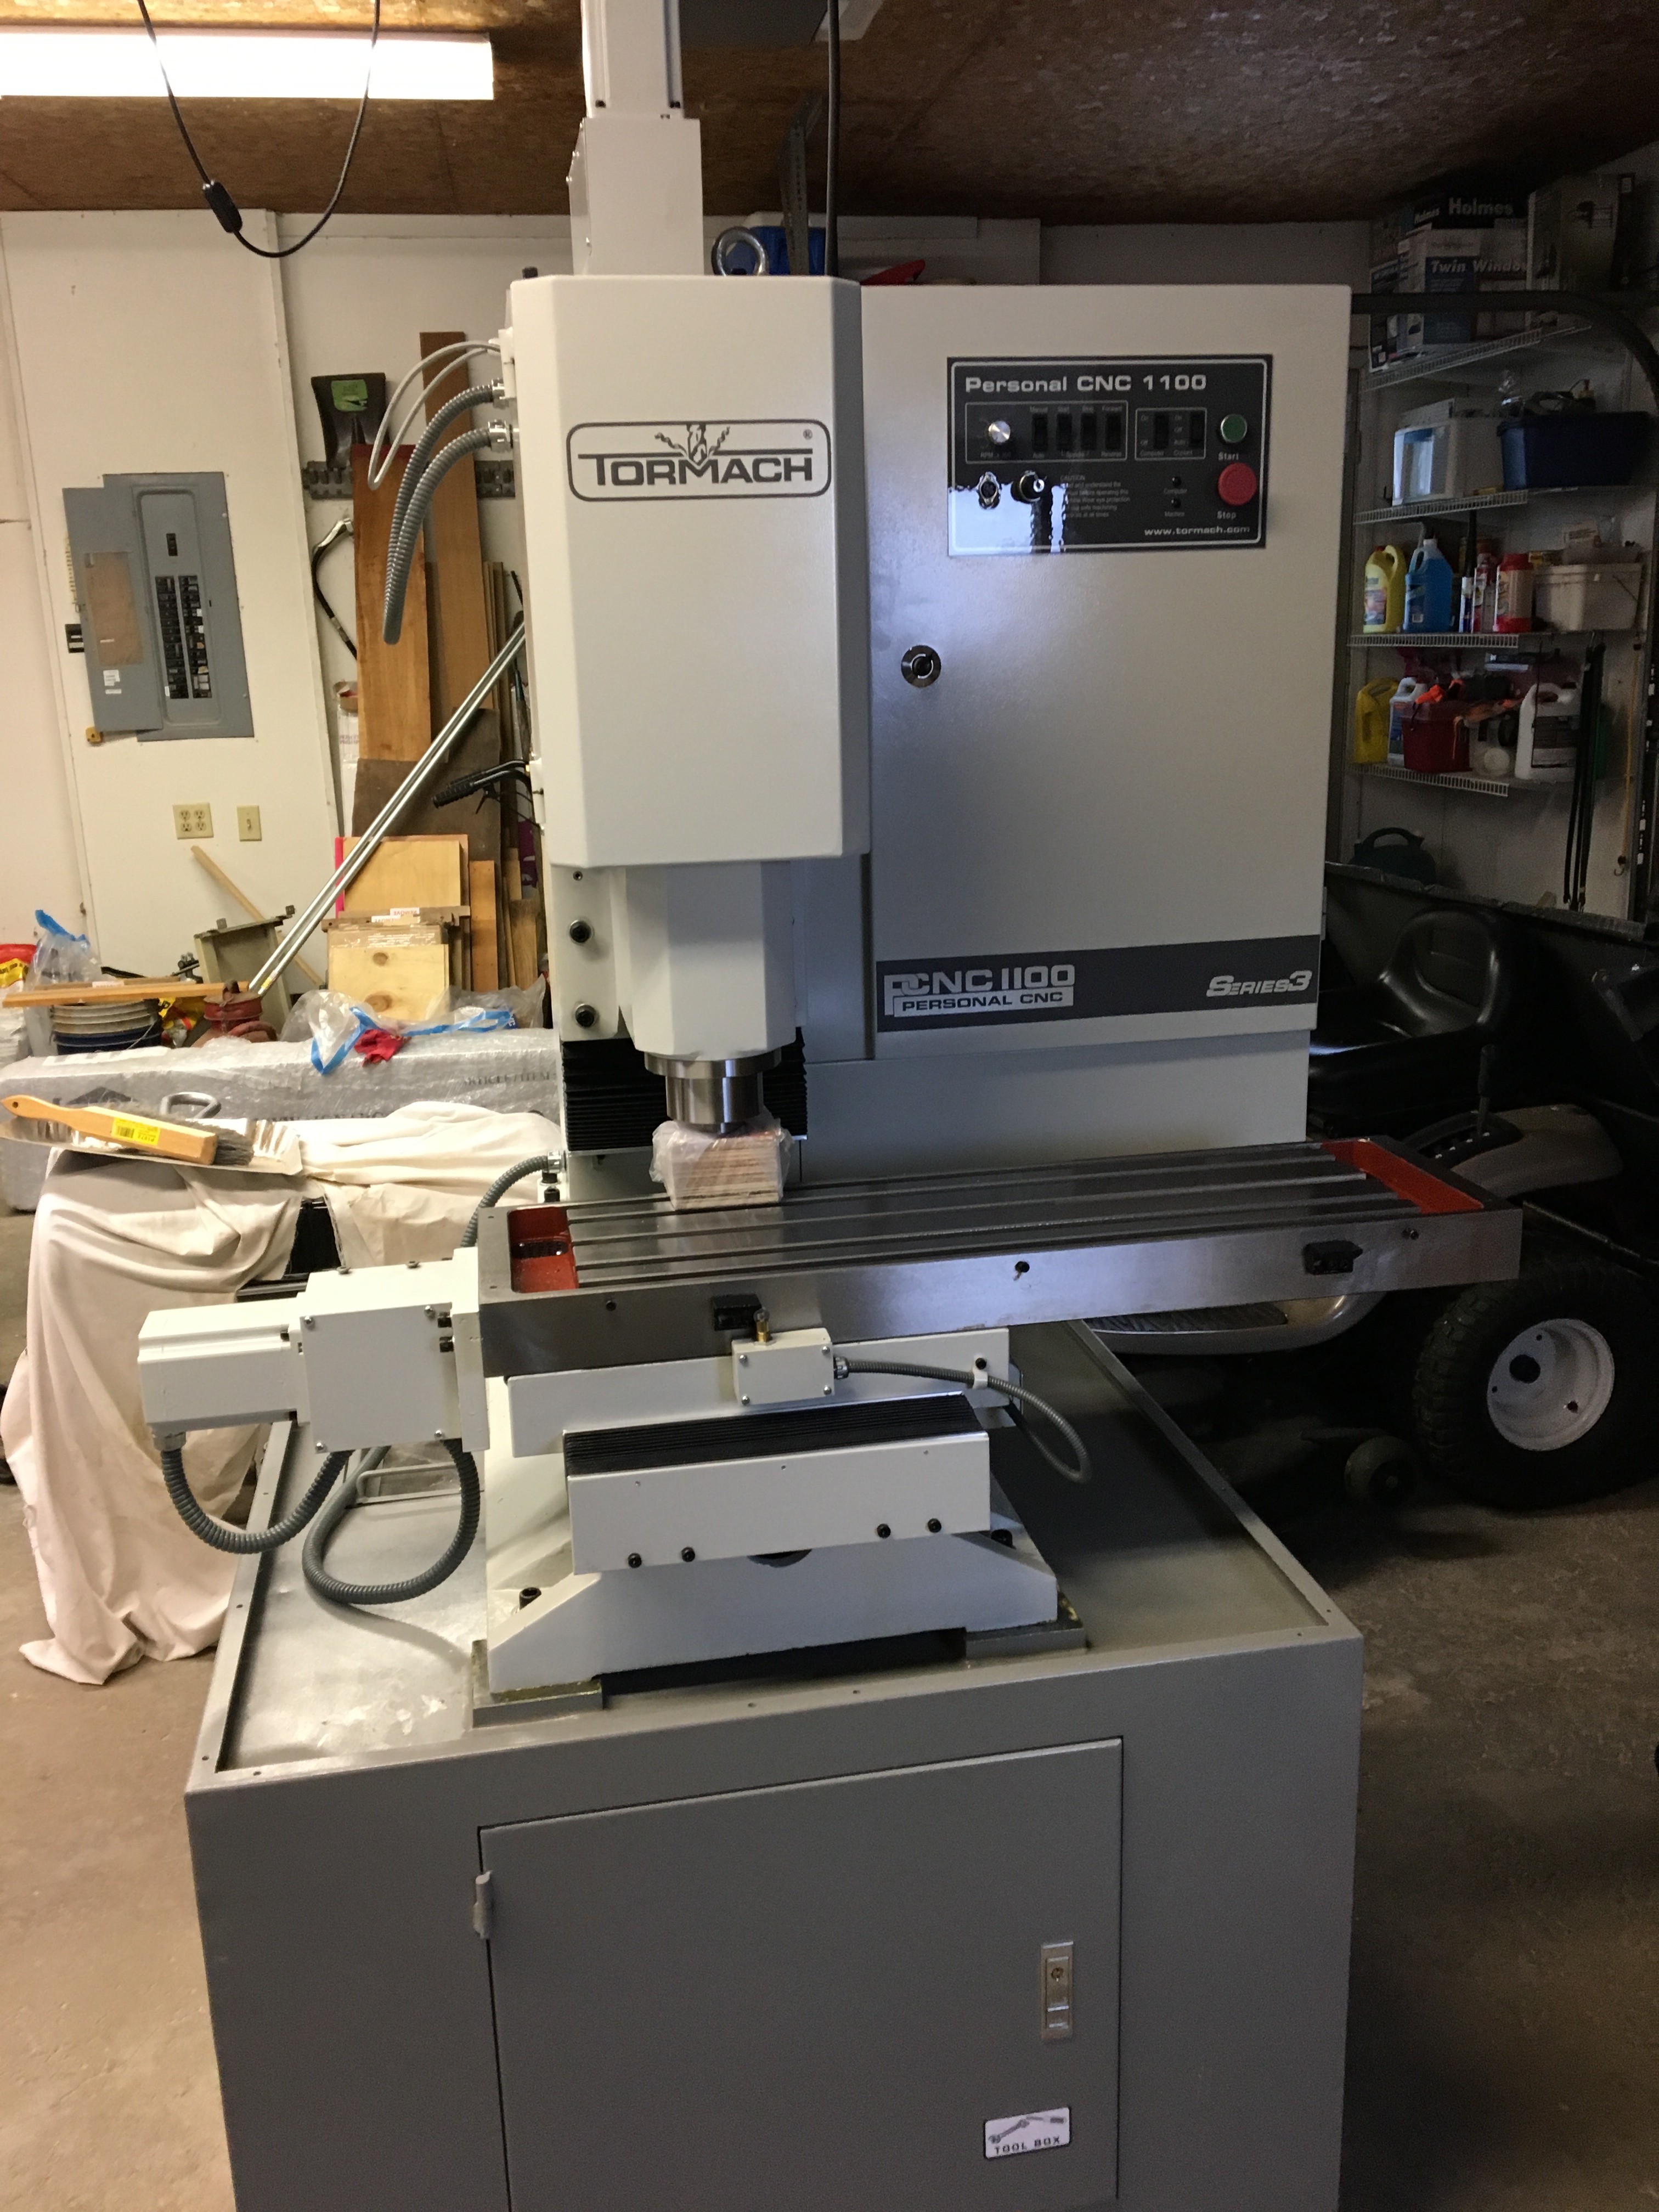 Leasing CNC Equipment To Grow Your Business With Lucy Burke